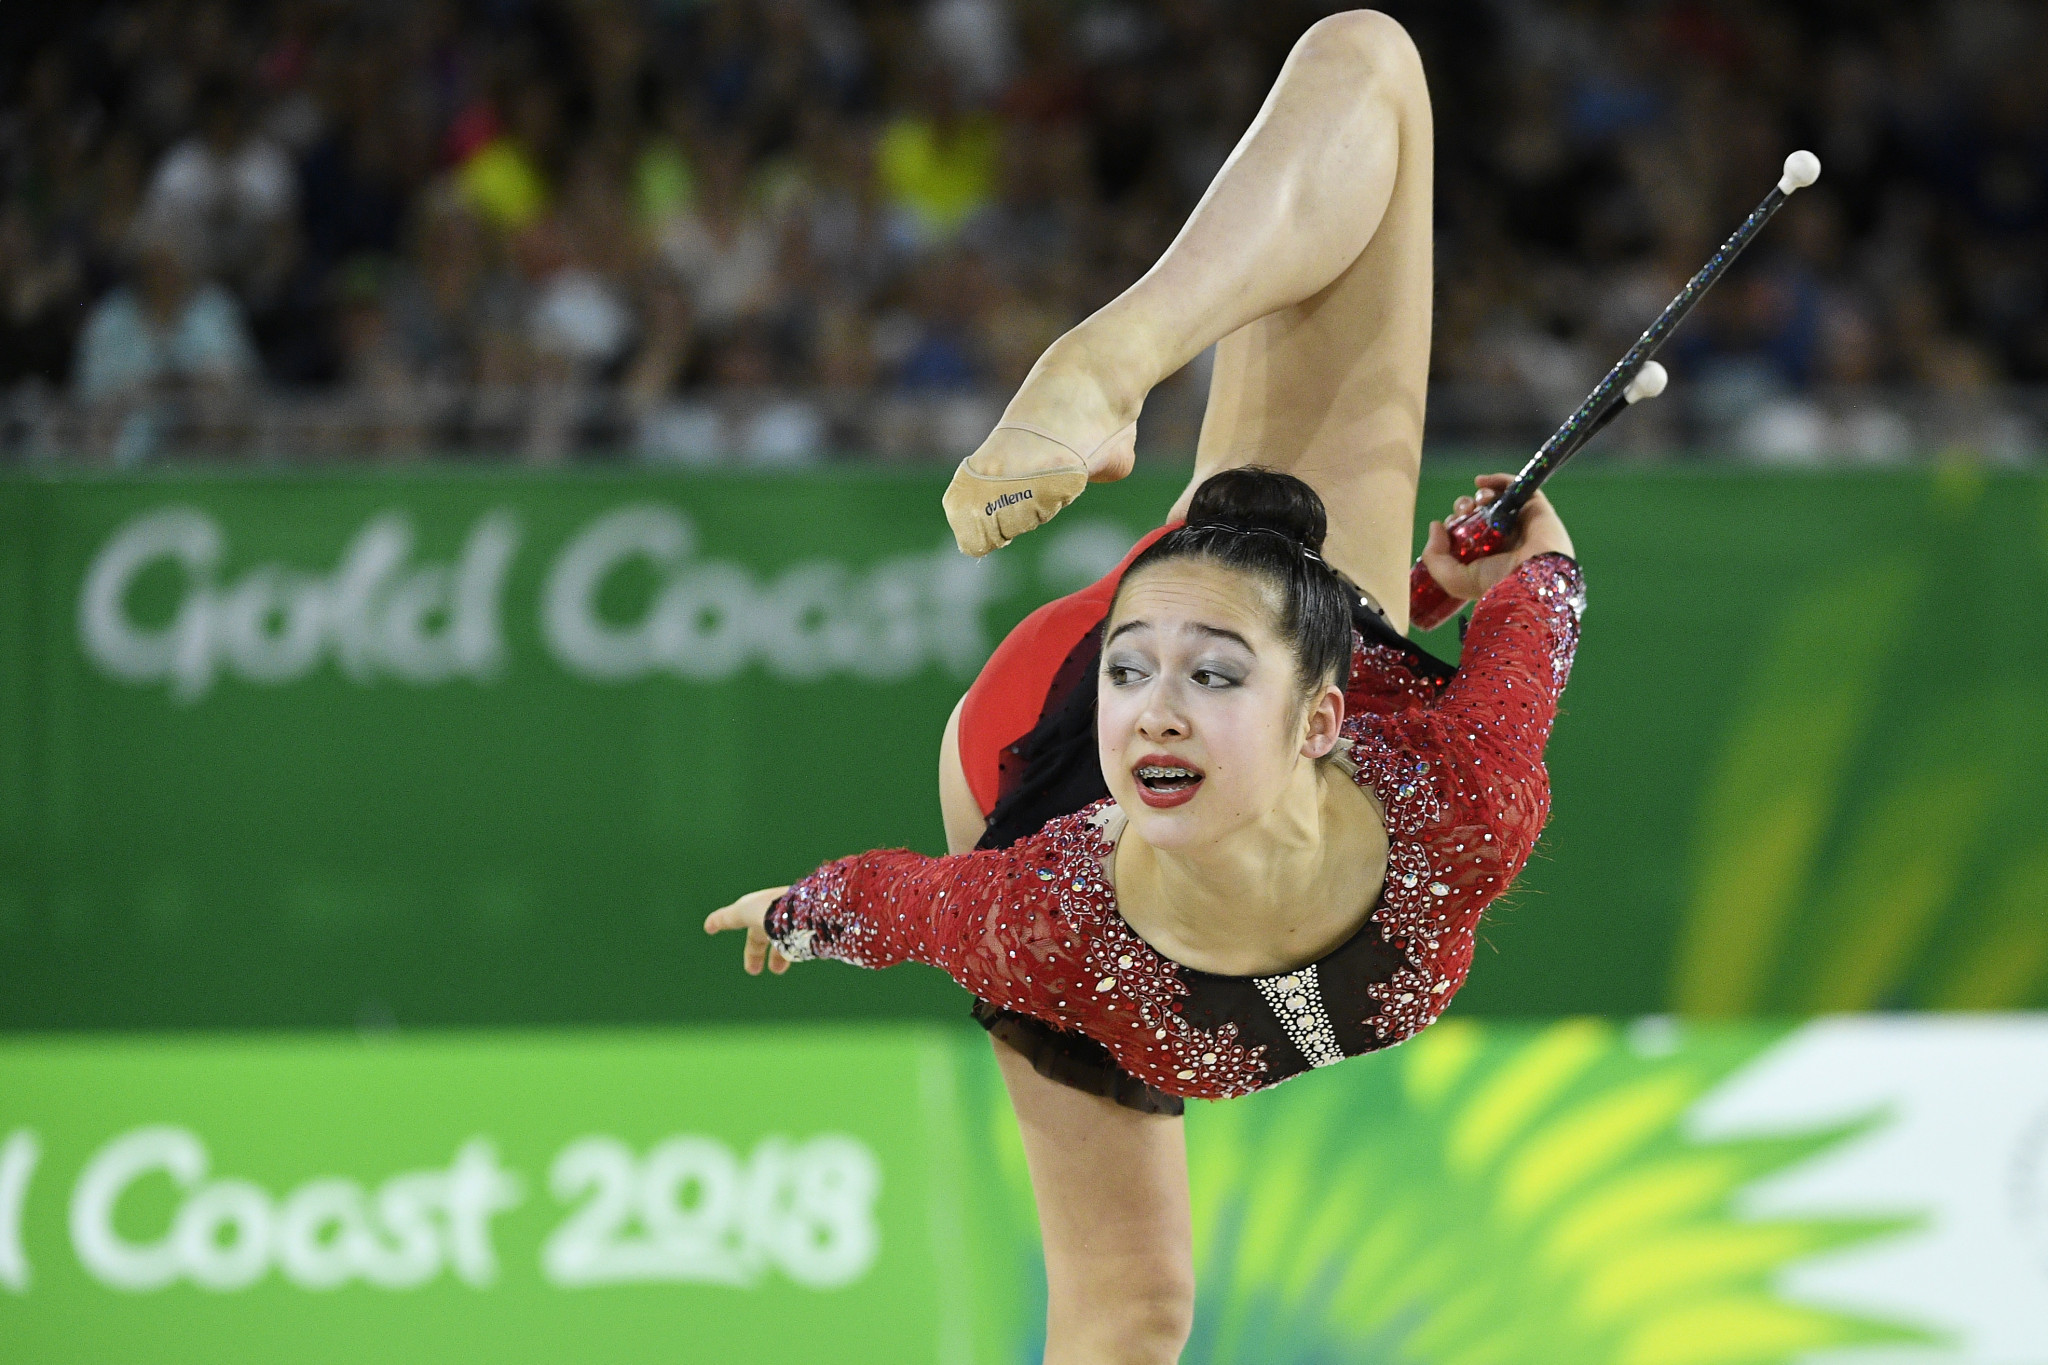 Canada's Sophie Crane overcame a mistake at the beginning of her routine to win the Commonwealth Games gold medal in the clubs at Gold Coast 2018 ©Getty Images